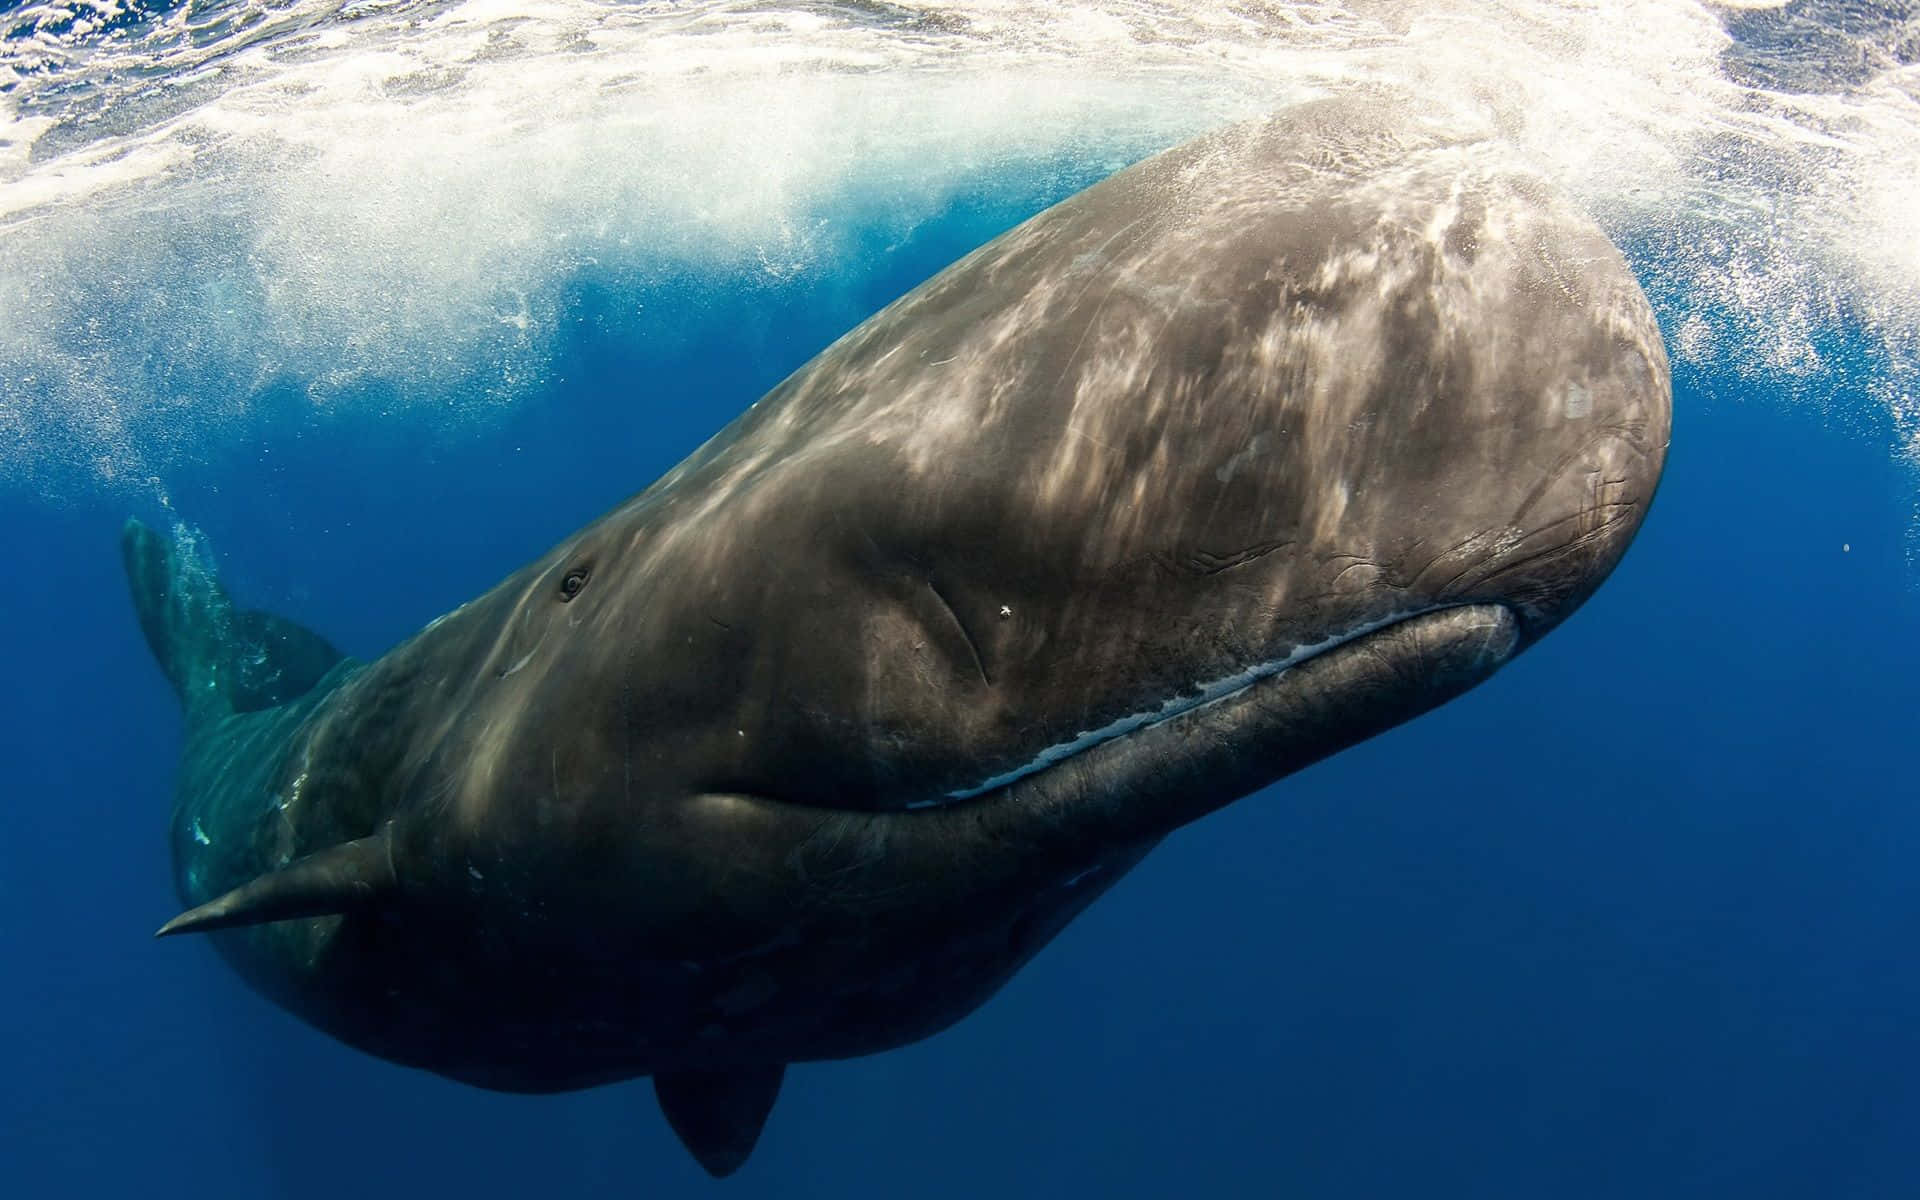 A Sperm Whale swimming in the deep blue sea